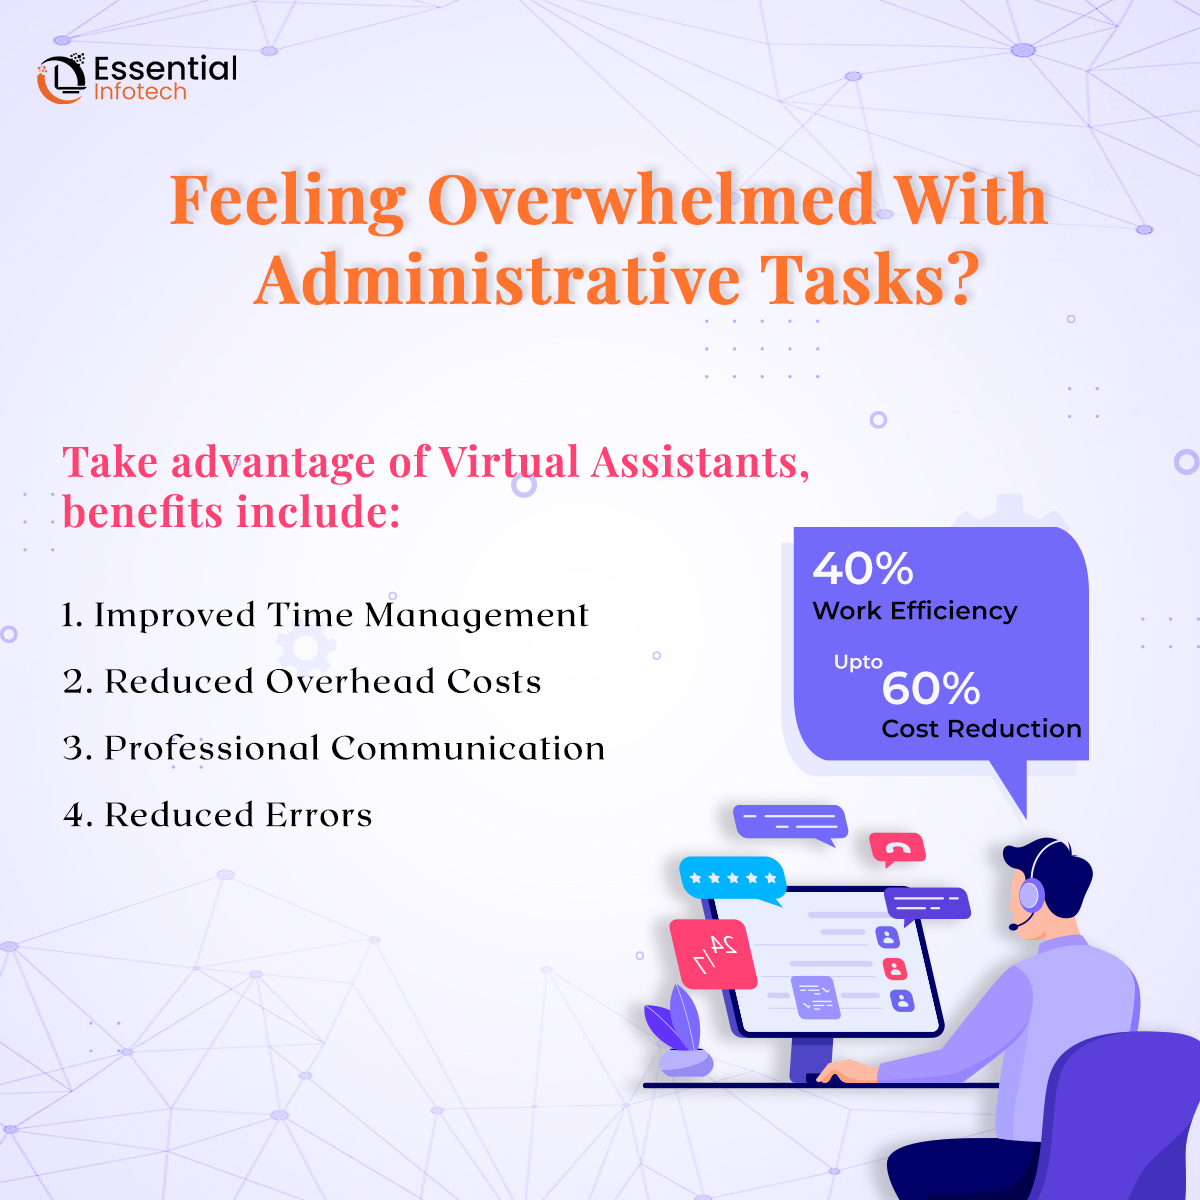 Administrative tasks are often repetitive but essential for keeping a business running smoothly. #EssentialInfotech #VirtualAssistance #AdministrativeTask #outsourcing #bpo